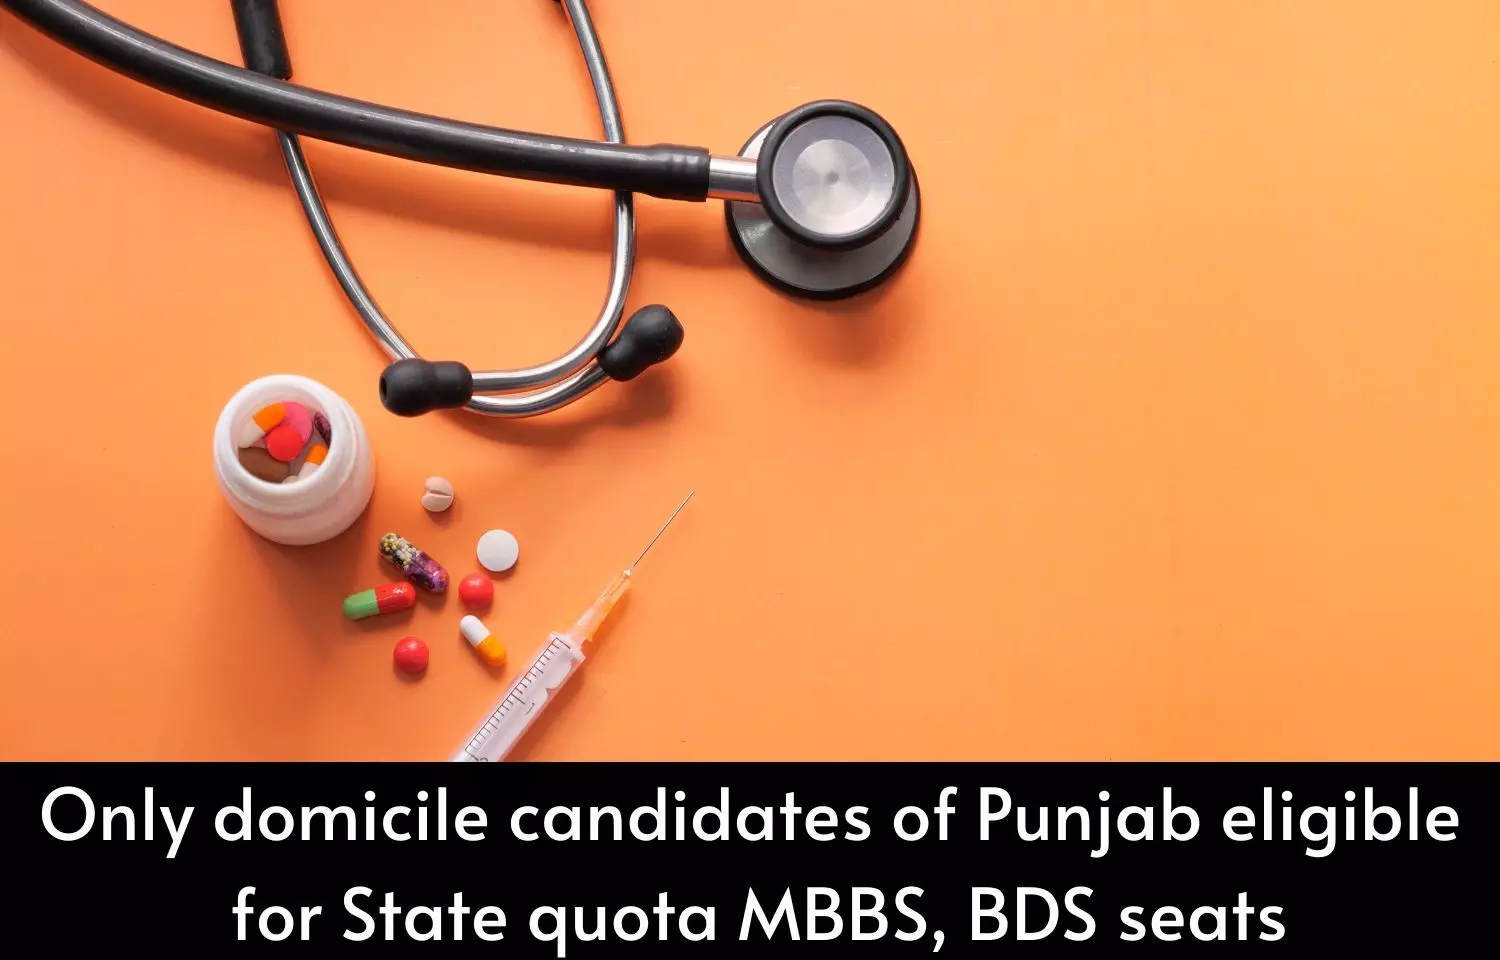 Punjab implements new rule, only domicile candidates eligible for state quota MBBS, BDS seats in NEET